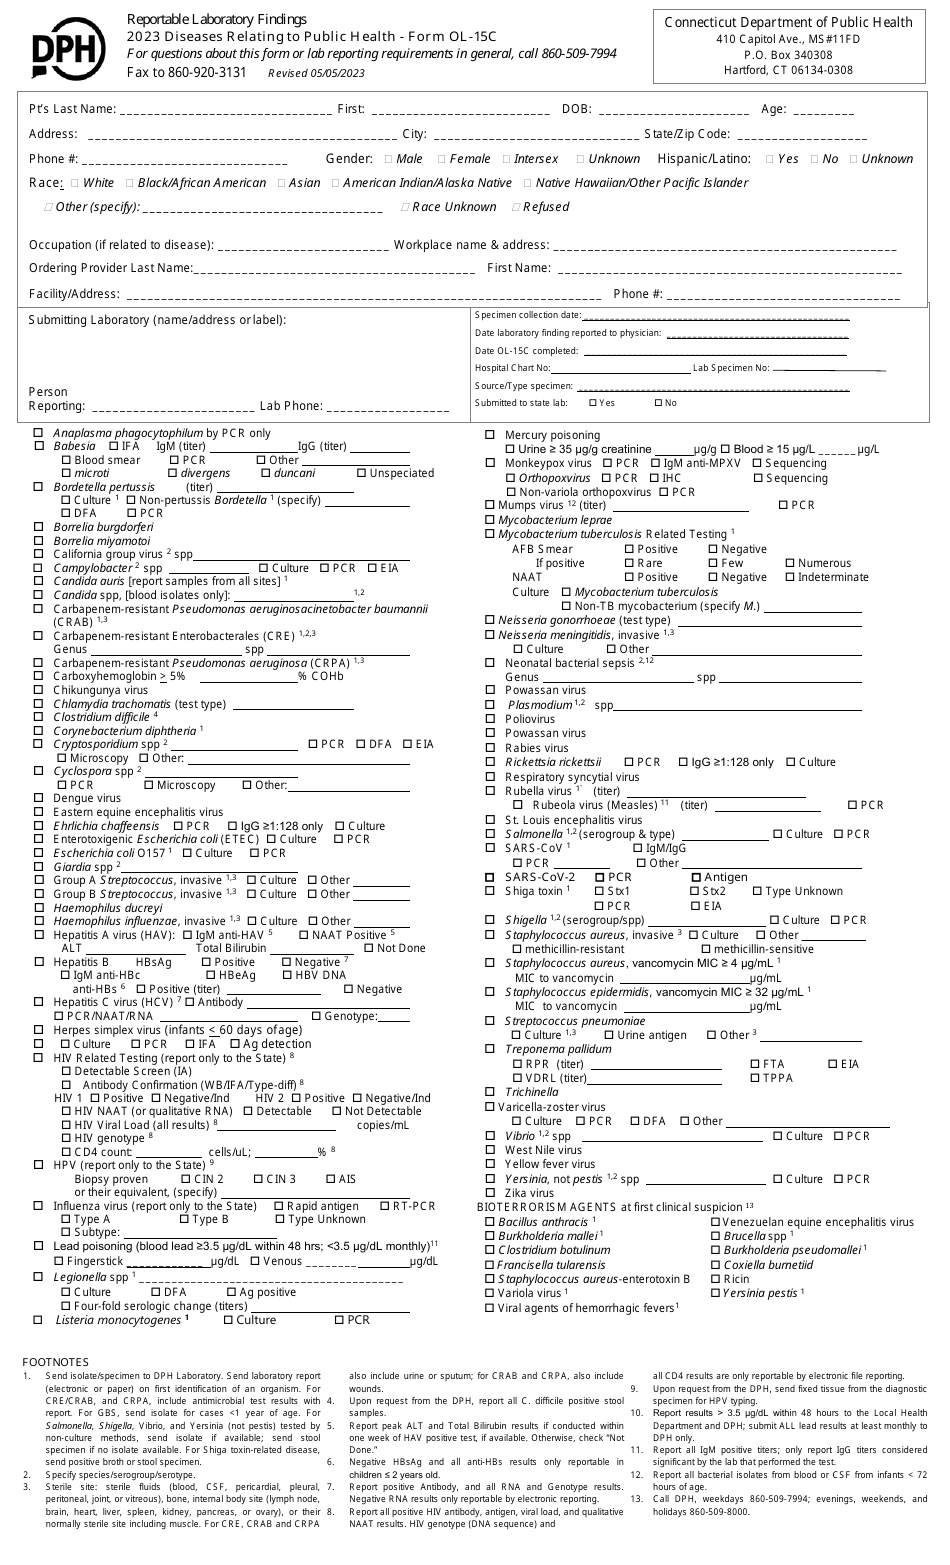 Form OL-15C Diseases Relating to Public Health - Connecticut, Page 1